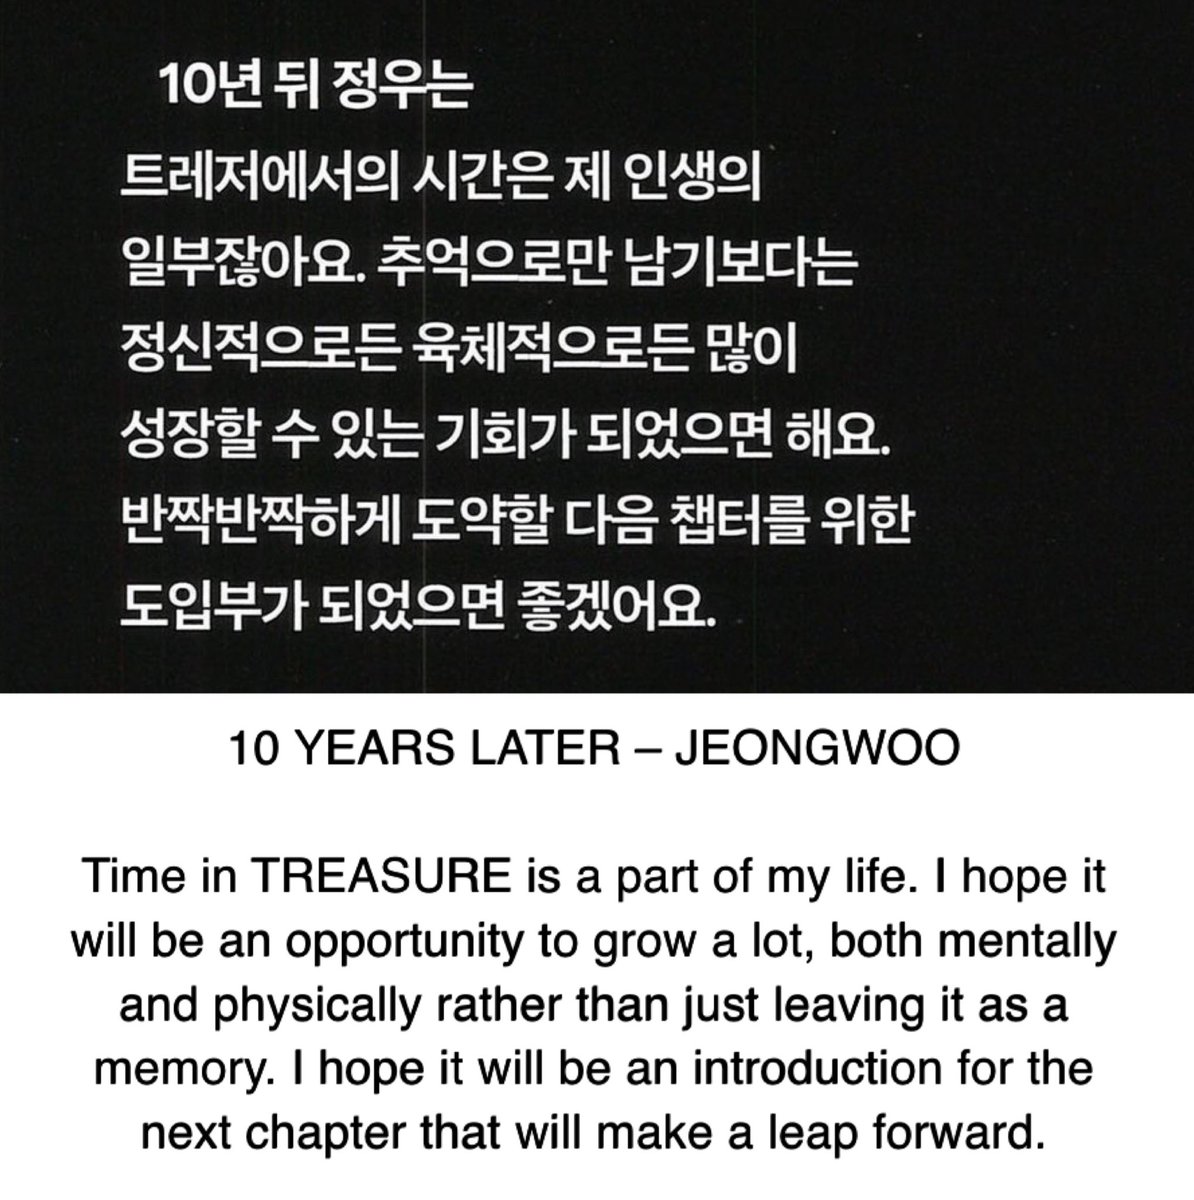 “Time in TREASURE is a part of my life. I hope it will be an opportunity to grow a lot, both mentally and physically rather than just leaving it as a memory. I hope it will be an introduction for the next chapter that will make a leap forward.”